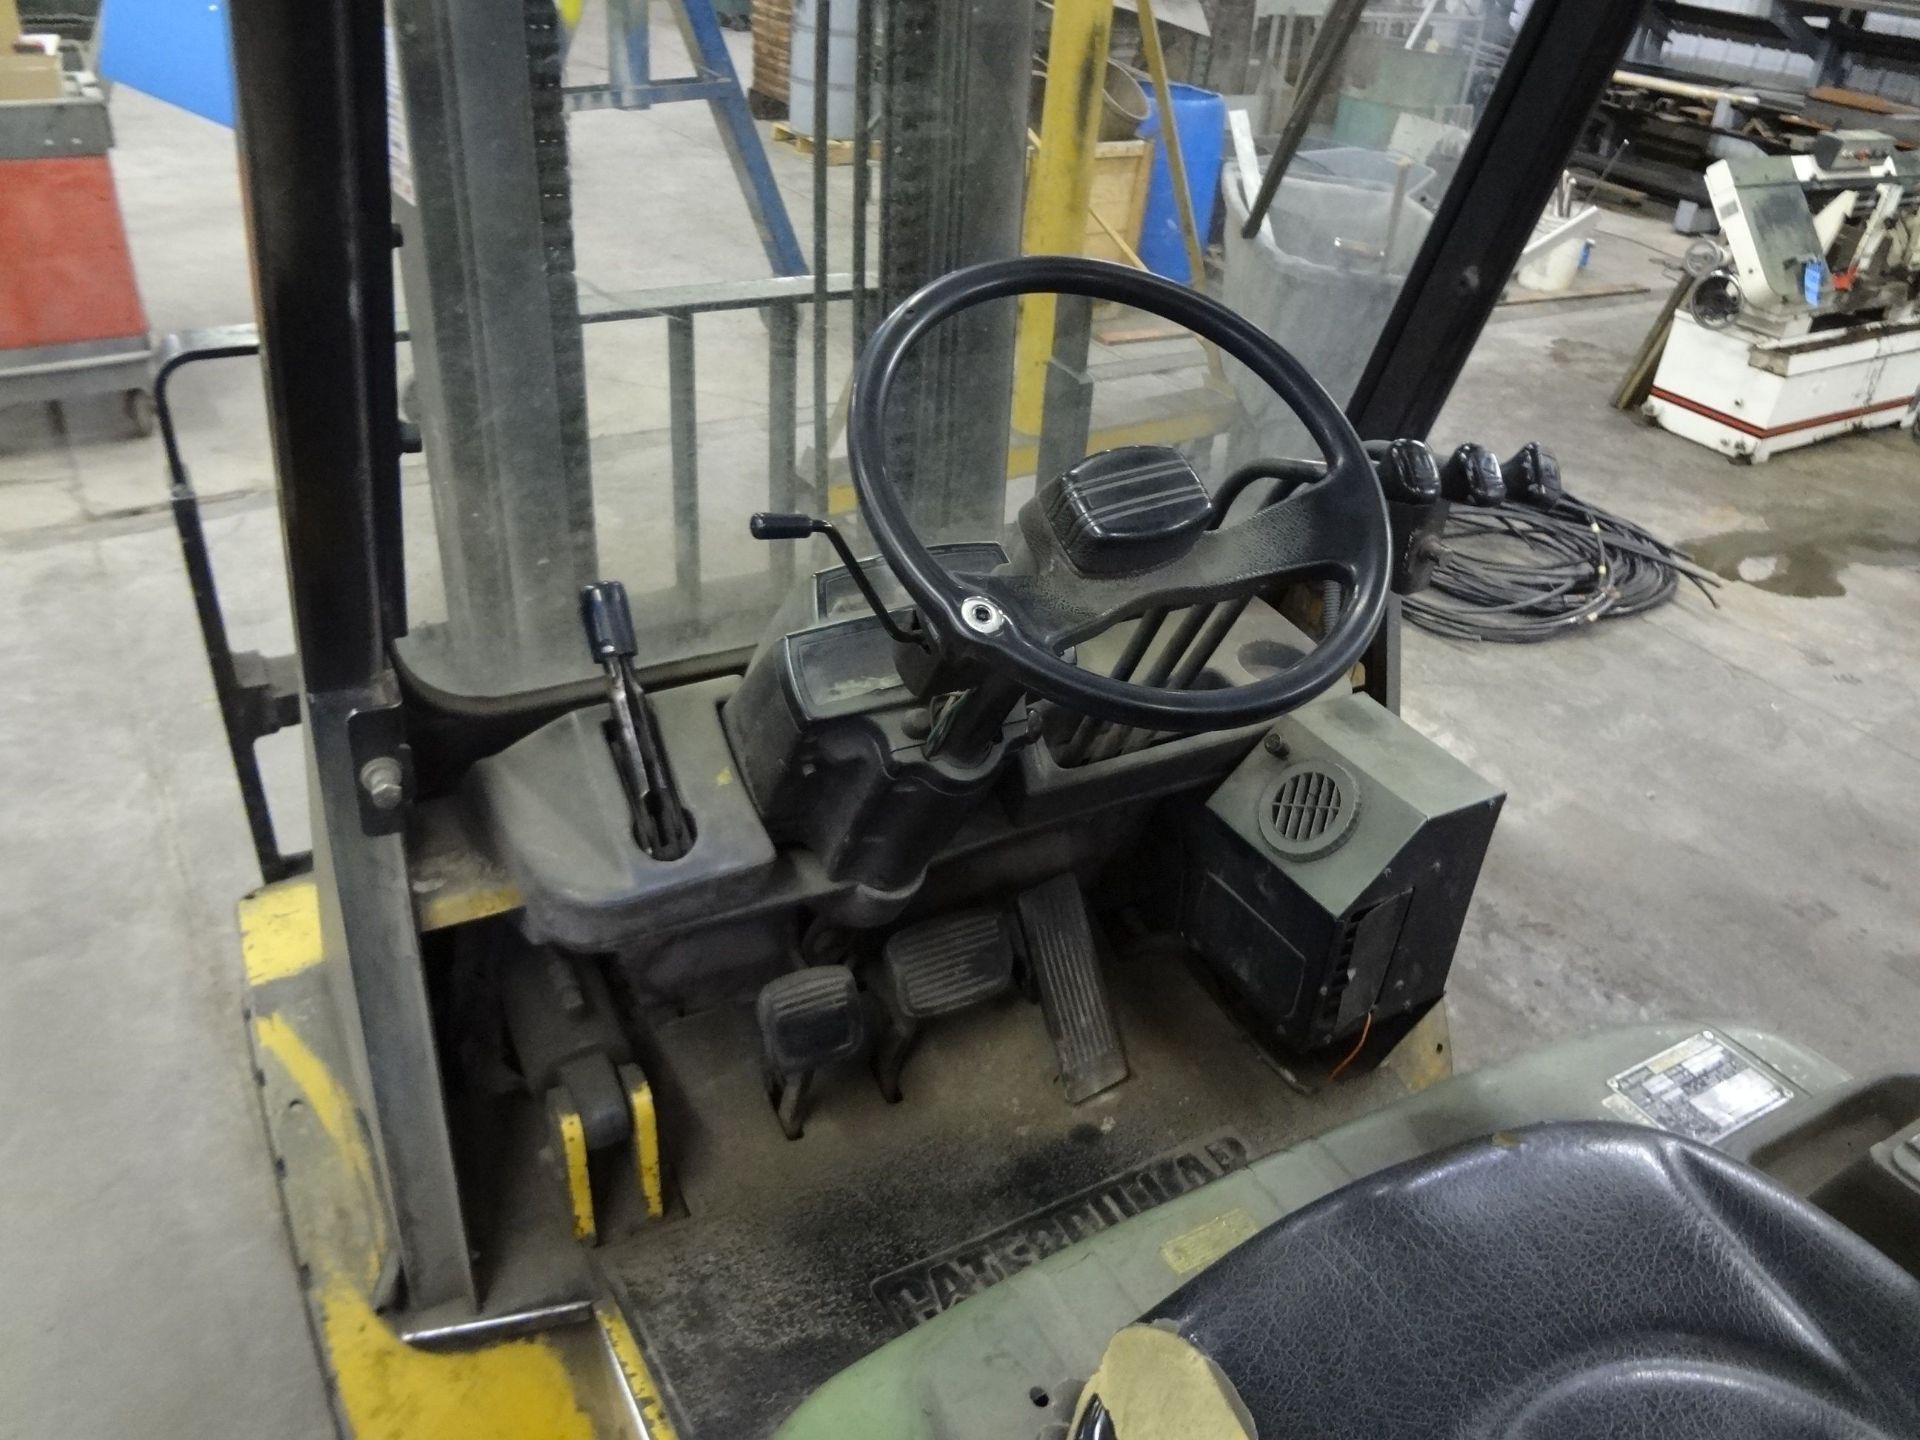 6,000 LB. CATERPILLAR MODEL DP-30 PNEUMATIC TIRE, DIESEL POWERED LIFT TRUCK; S/N 7KM3577, 2-STAGE - Image 6 of 7